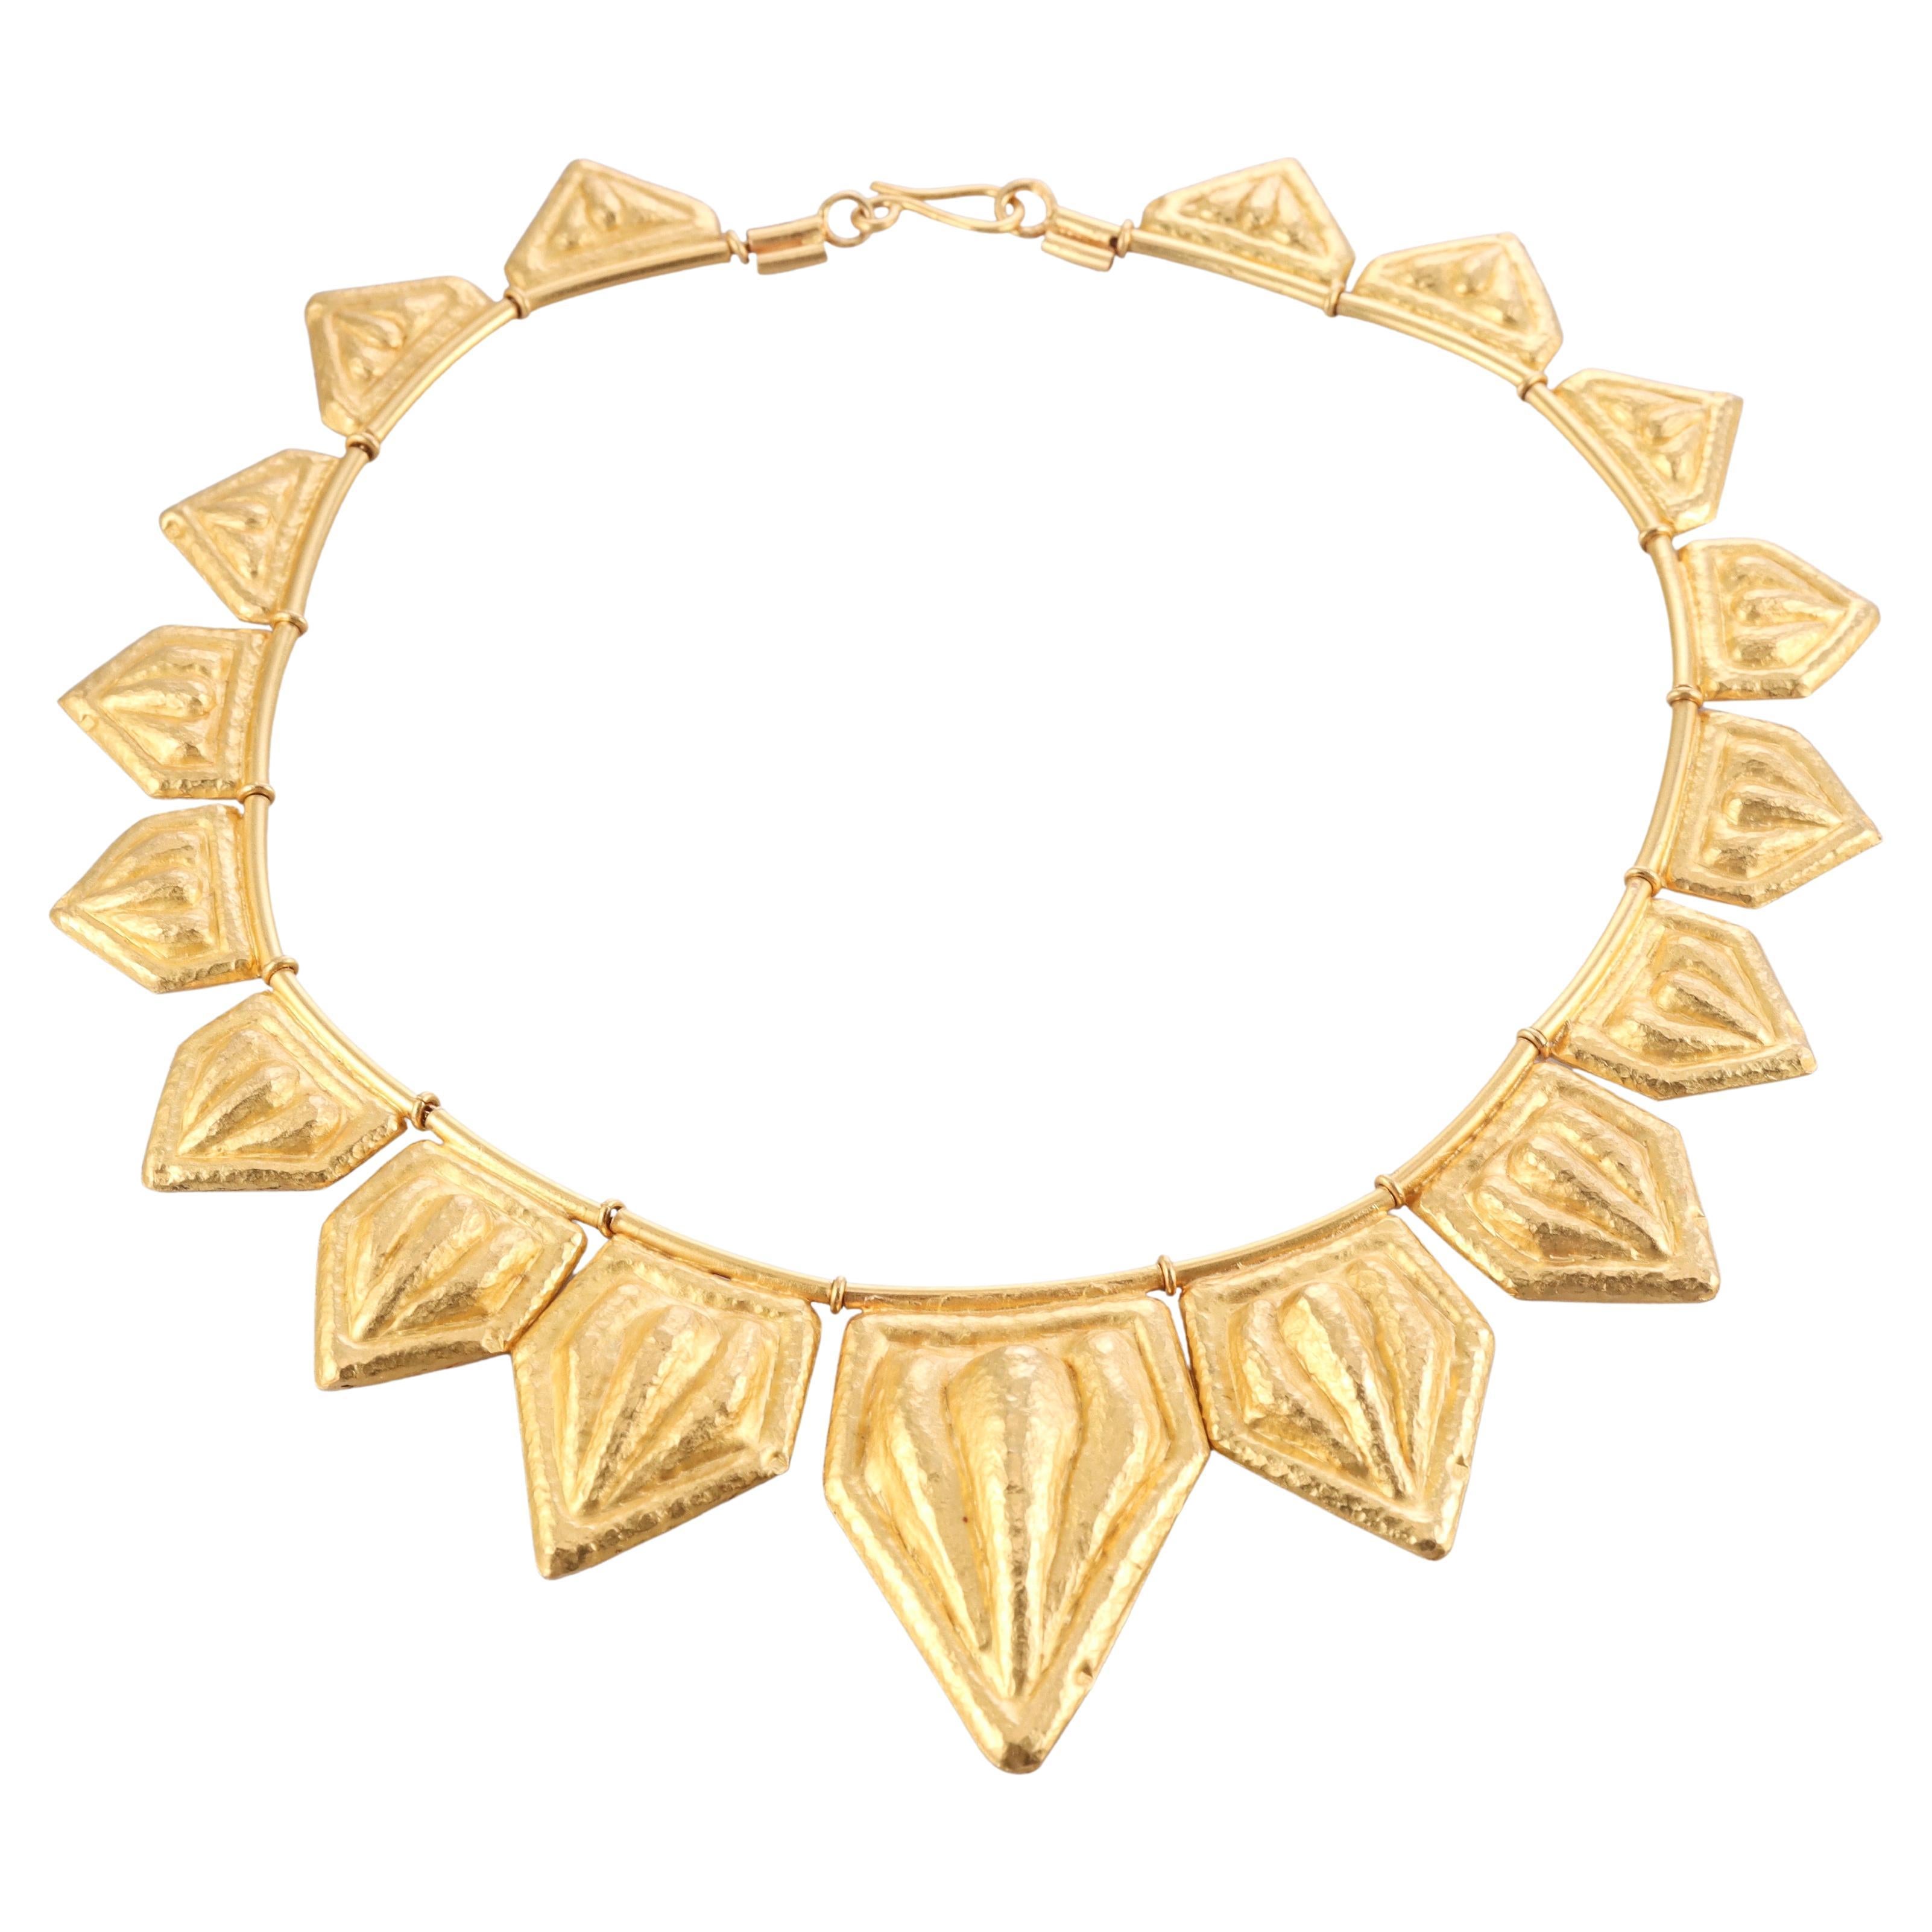 Greek Hand Hammered Finish Gold Plaque Necklace For Sale